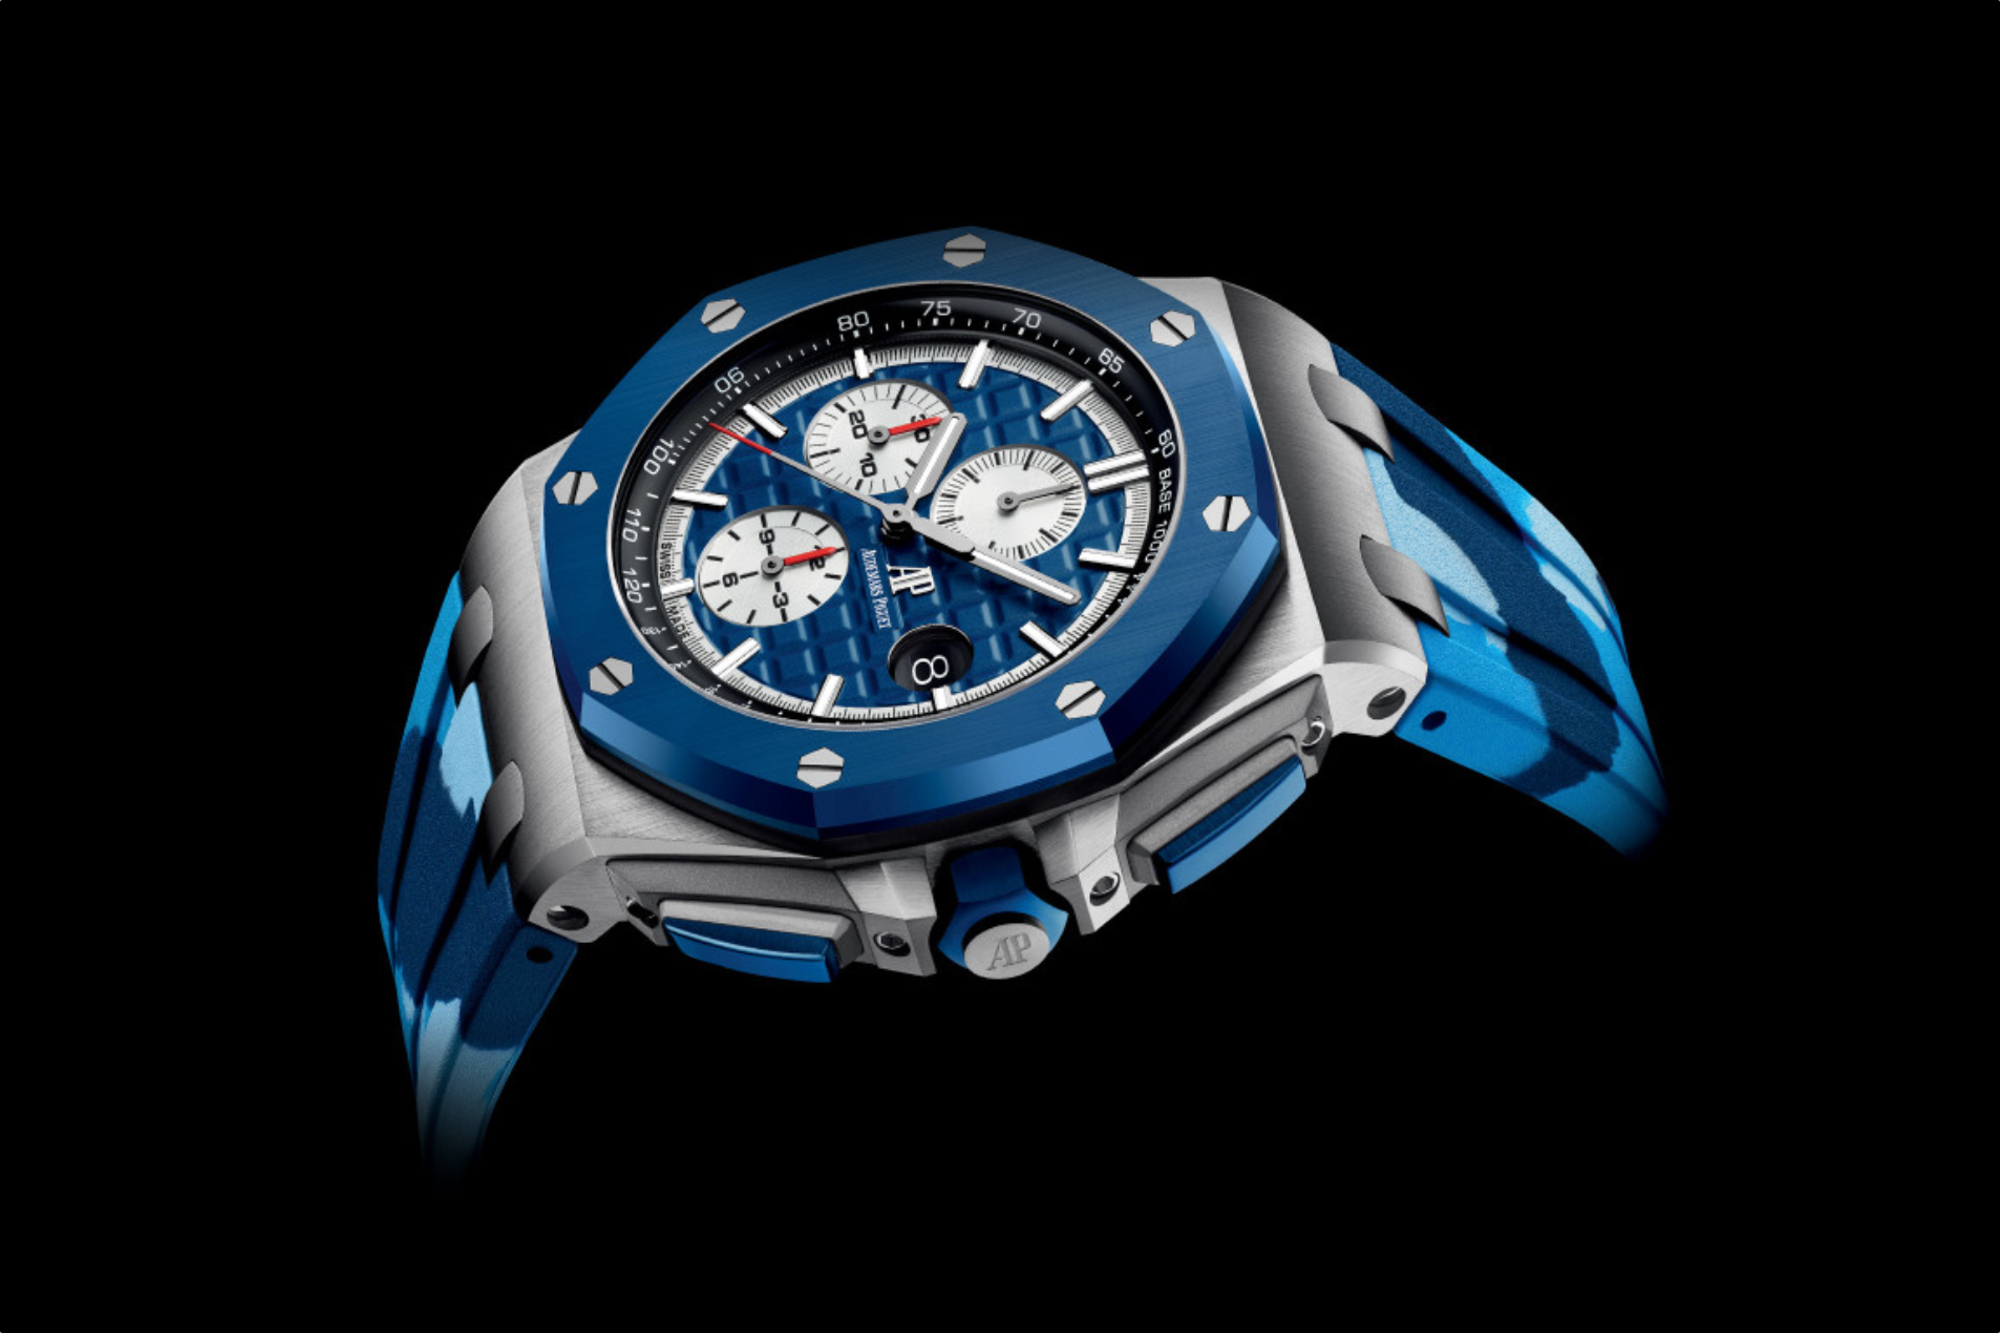 Royal Oak Offshore Chronograph Blue Camouflage Ref. 26400SO.OO.A335CA.01